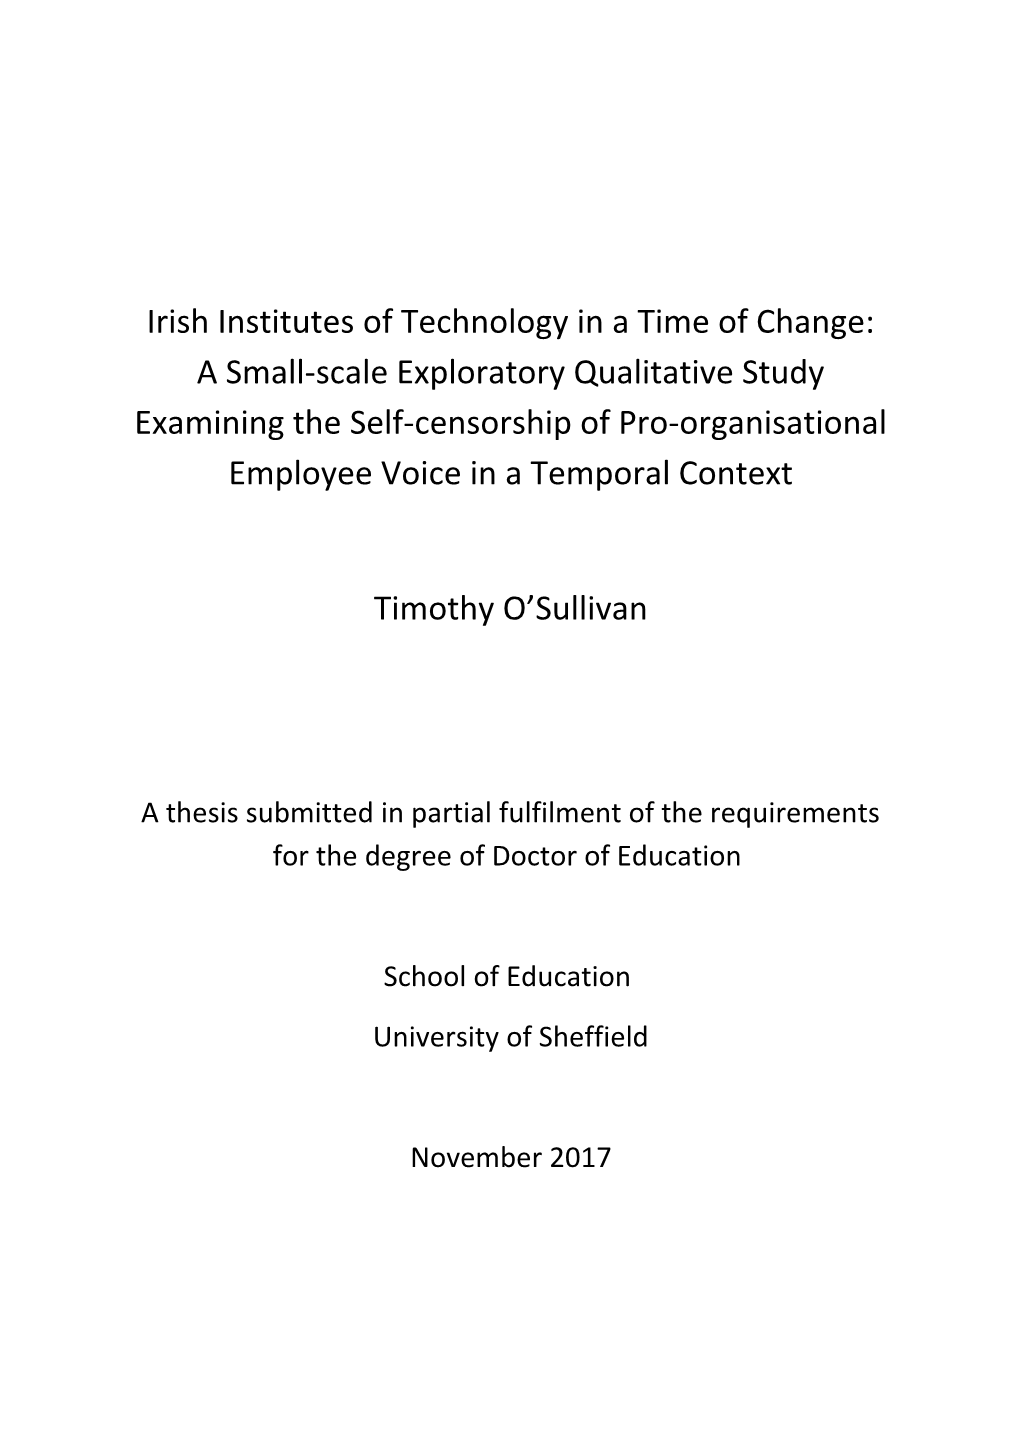 A Thesis Submitted in Partial Fulfilment of the Requirements for the Degree of Doctor Of